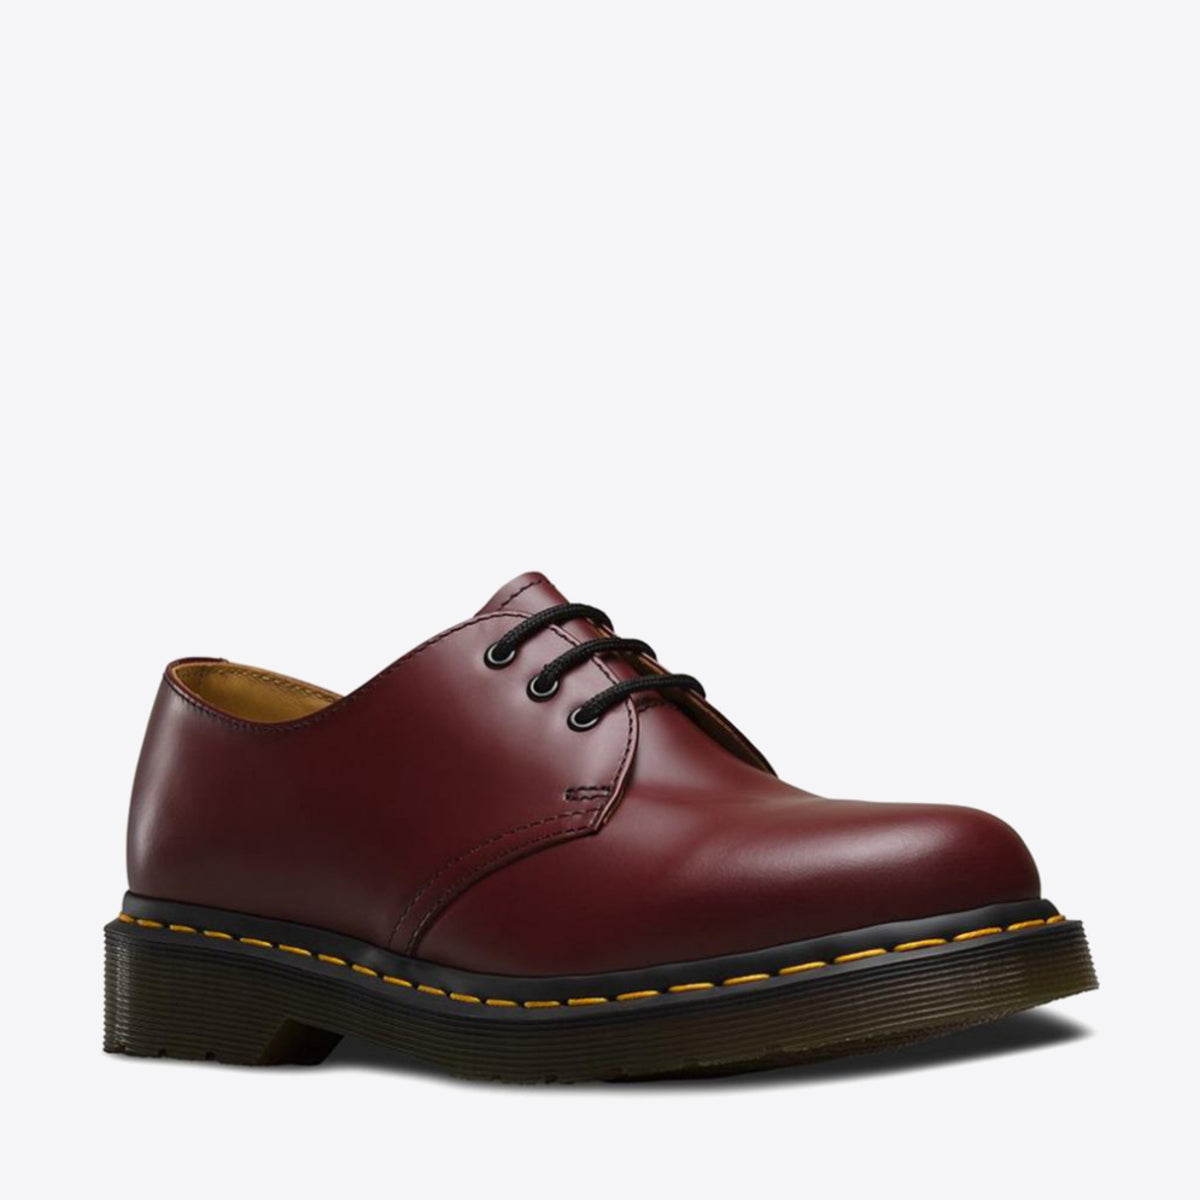 DR MARTENS 1461 Smooth 3 Eye Shoe Cherry Red - Image 8